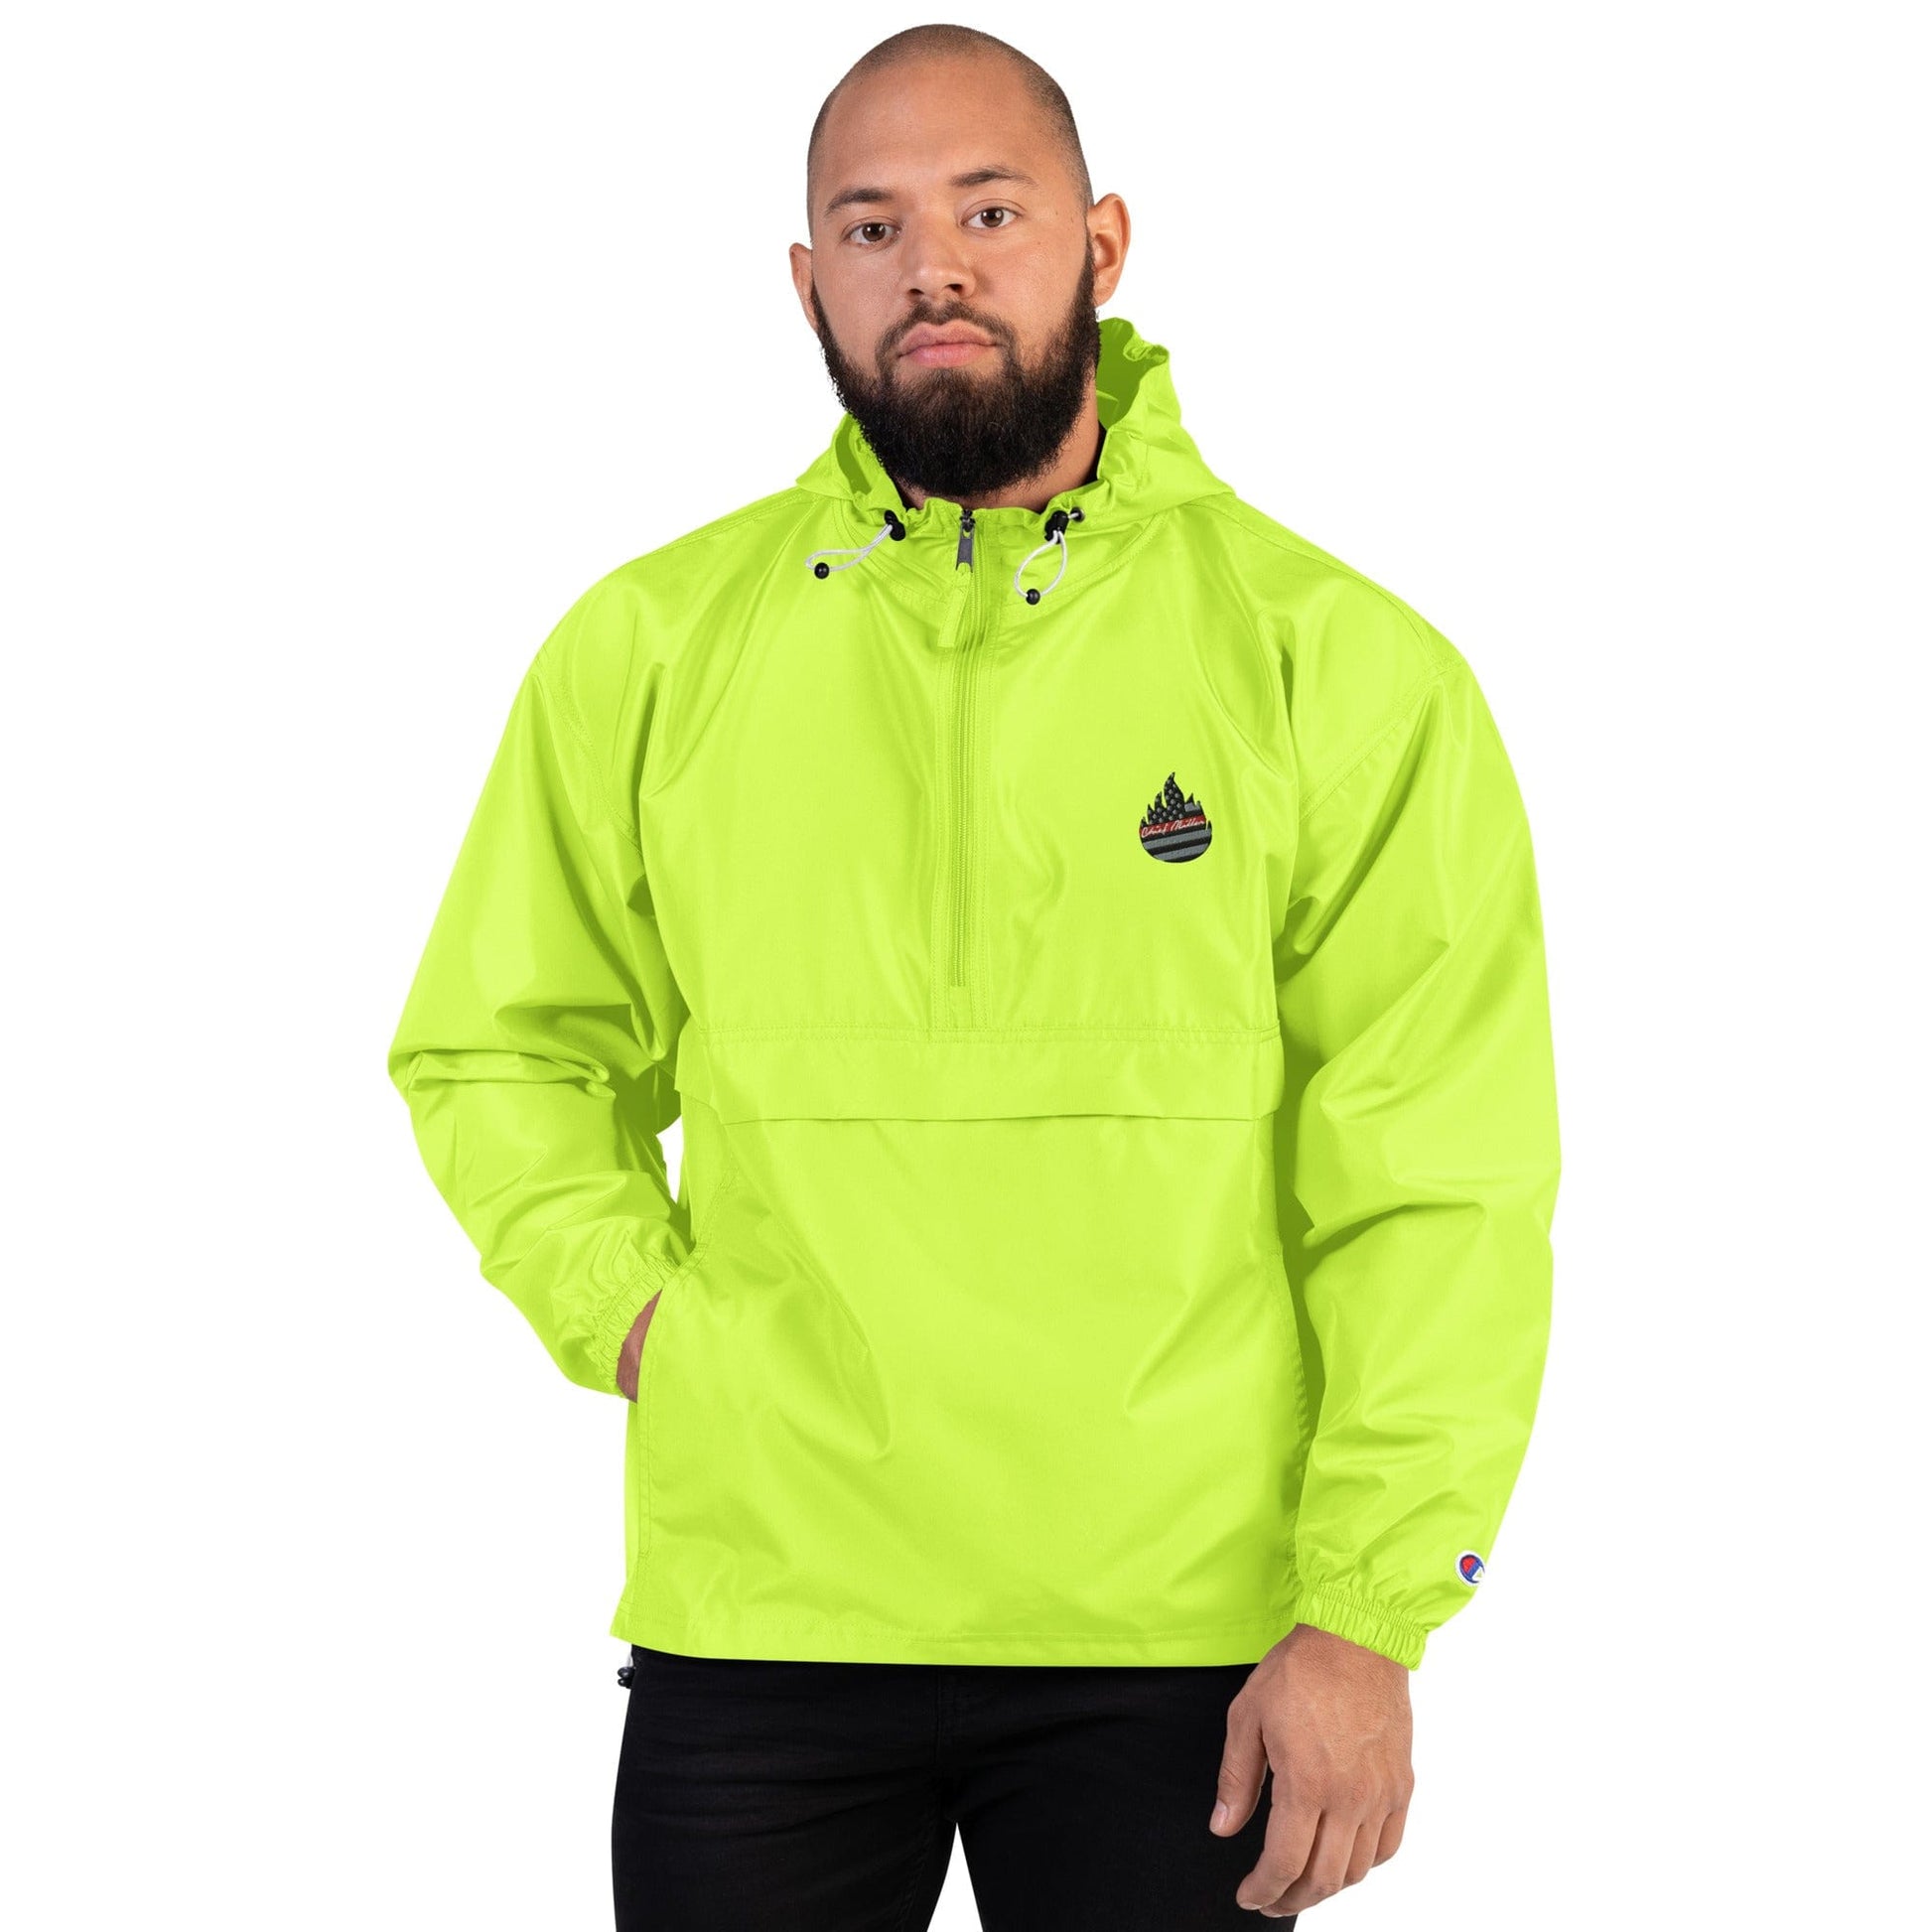 Chief Miller Chief Miller Embroidered Champion Packable Jacket Apparel